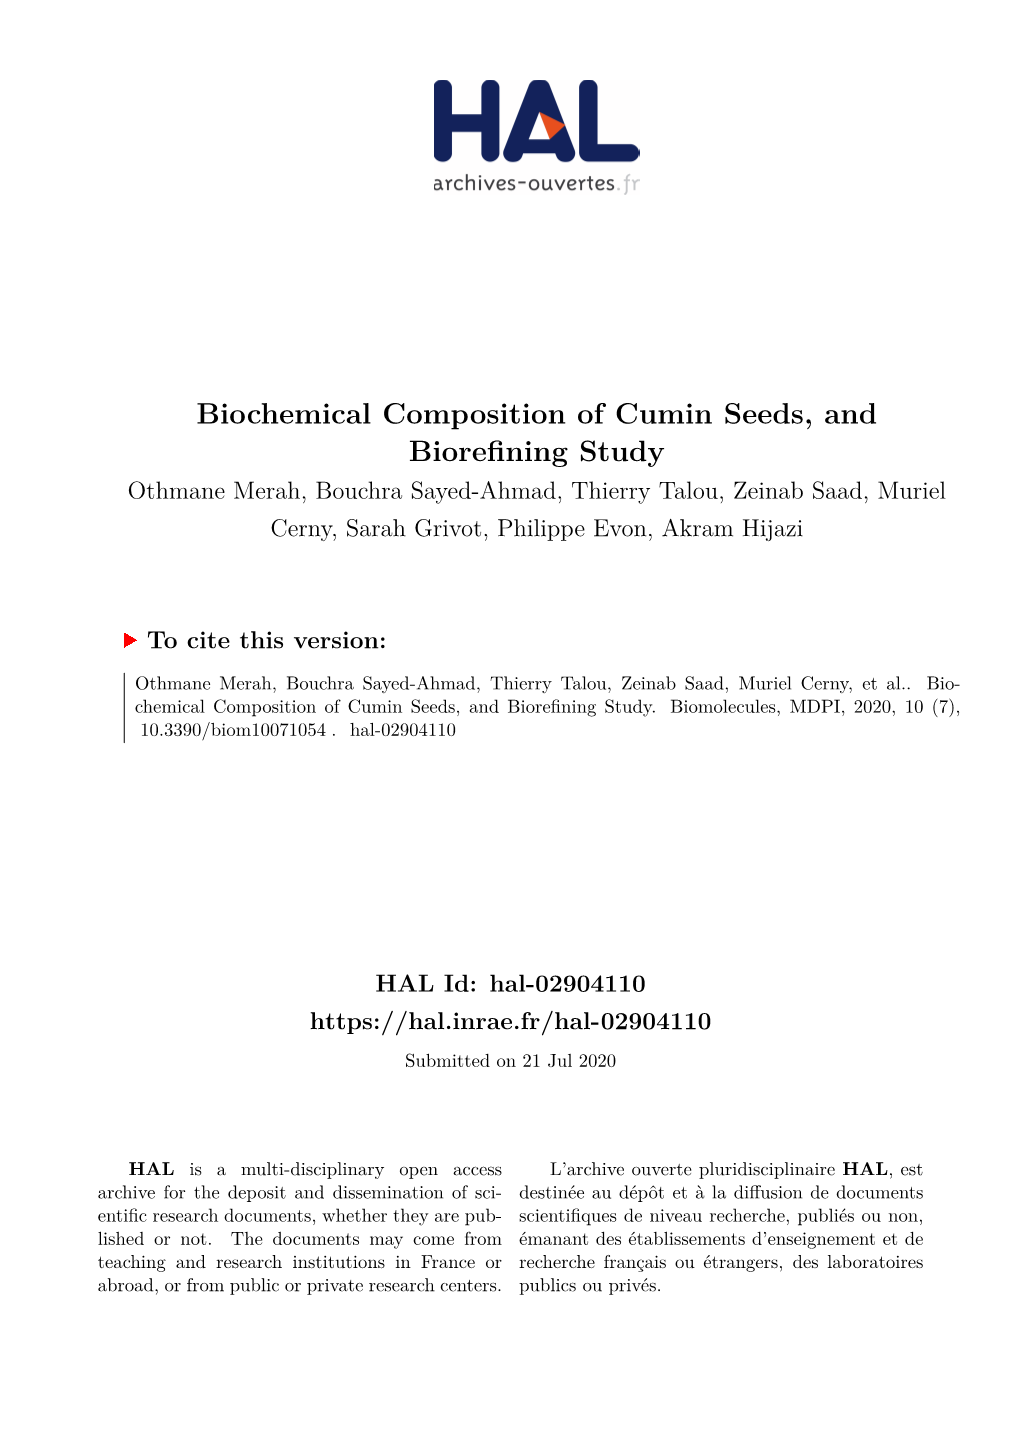 Biochemical Composition of Cumin Seeds, and Biorefining Study